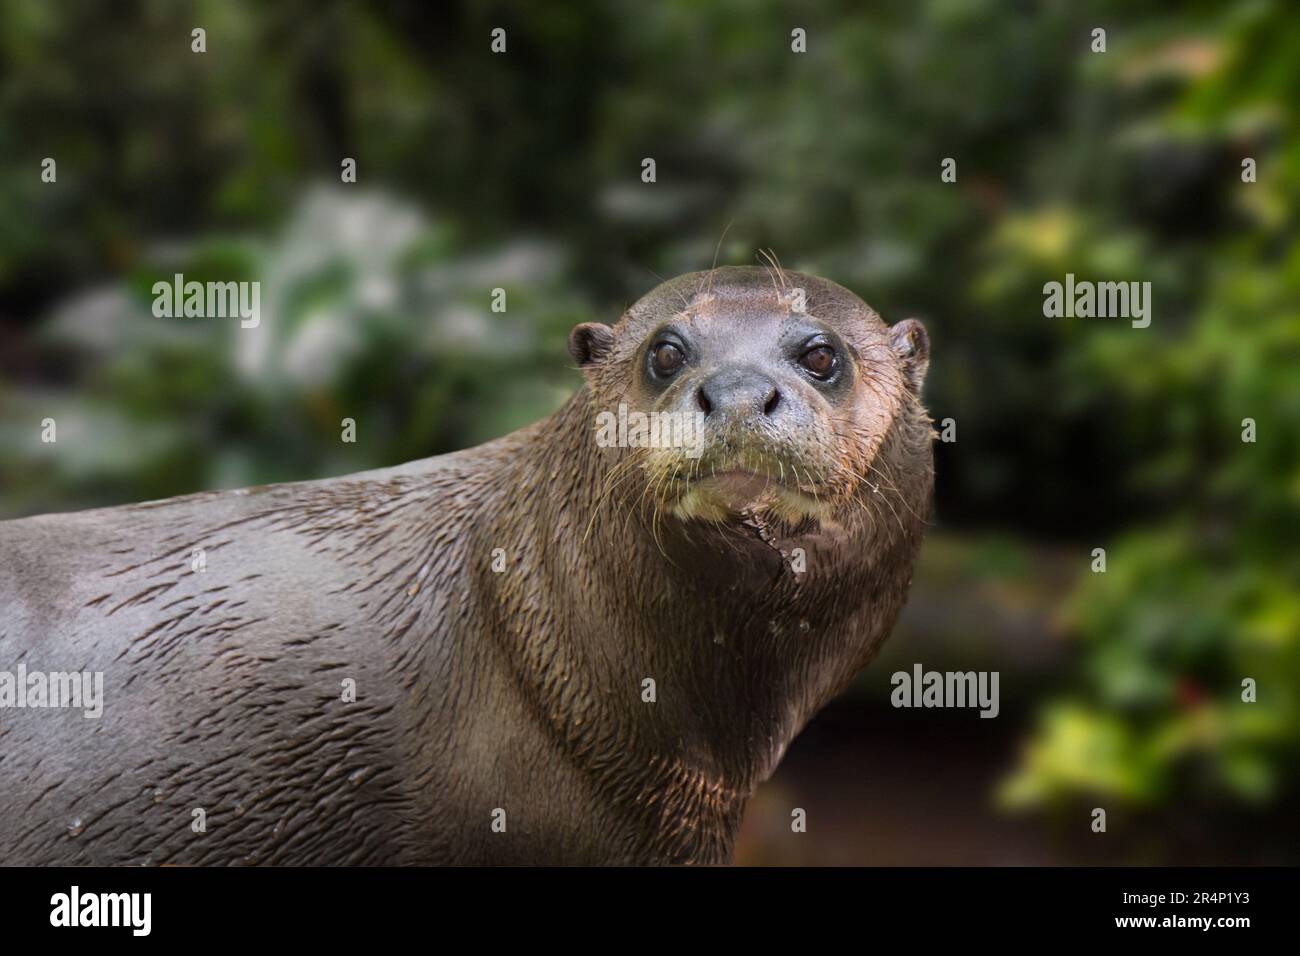 Giant otter / giant river otter (Pteronura brasiliensis) native along the Amazon River in South America Stock Photo